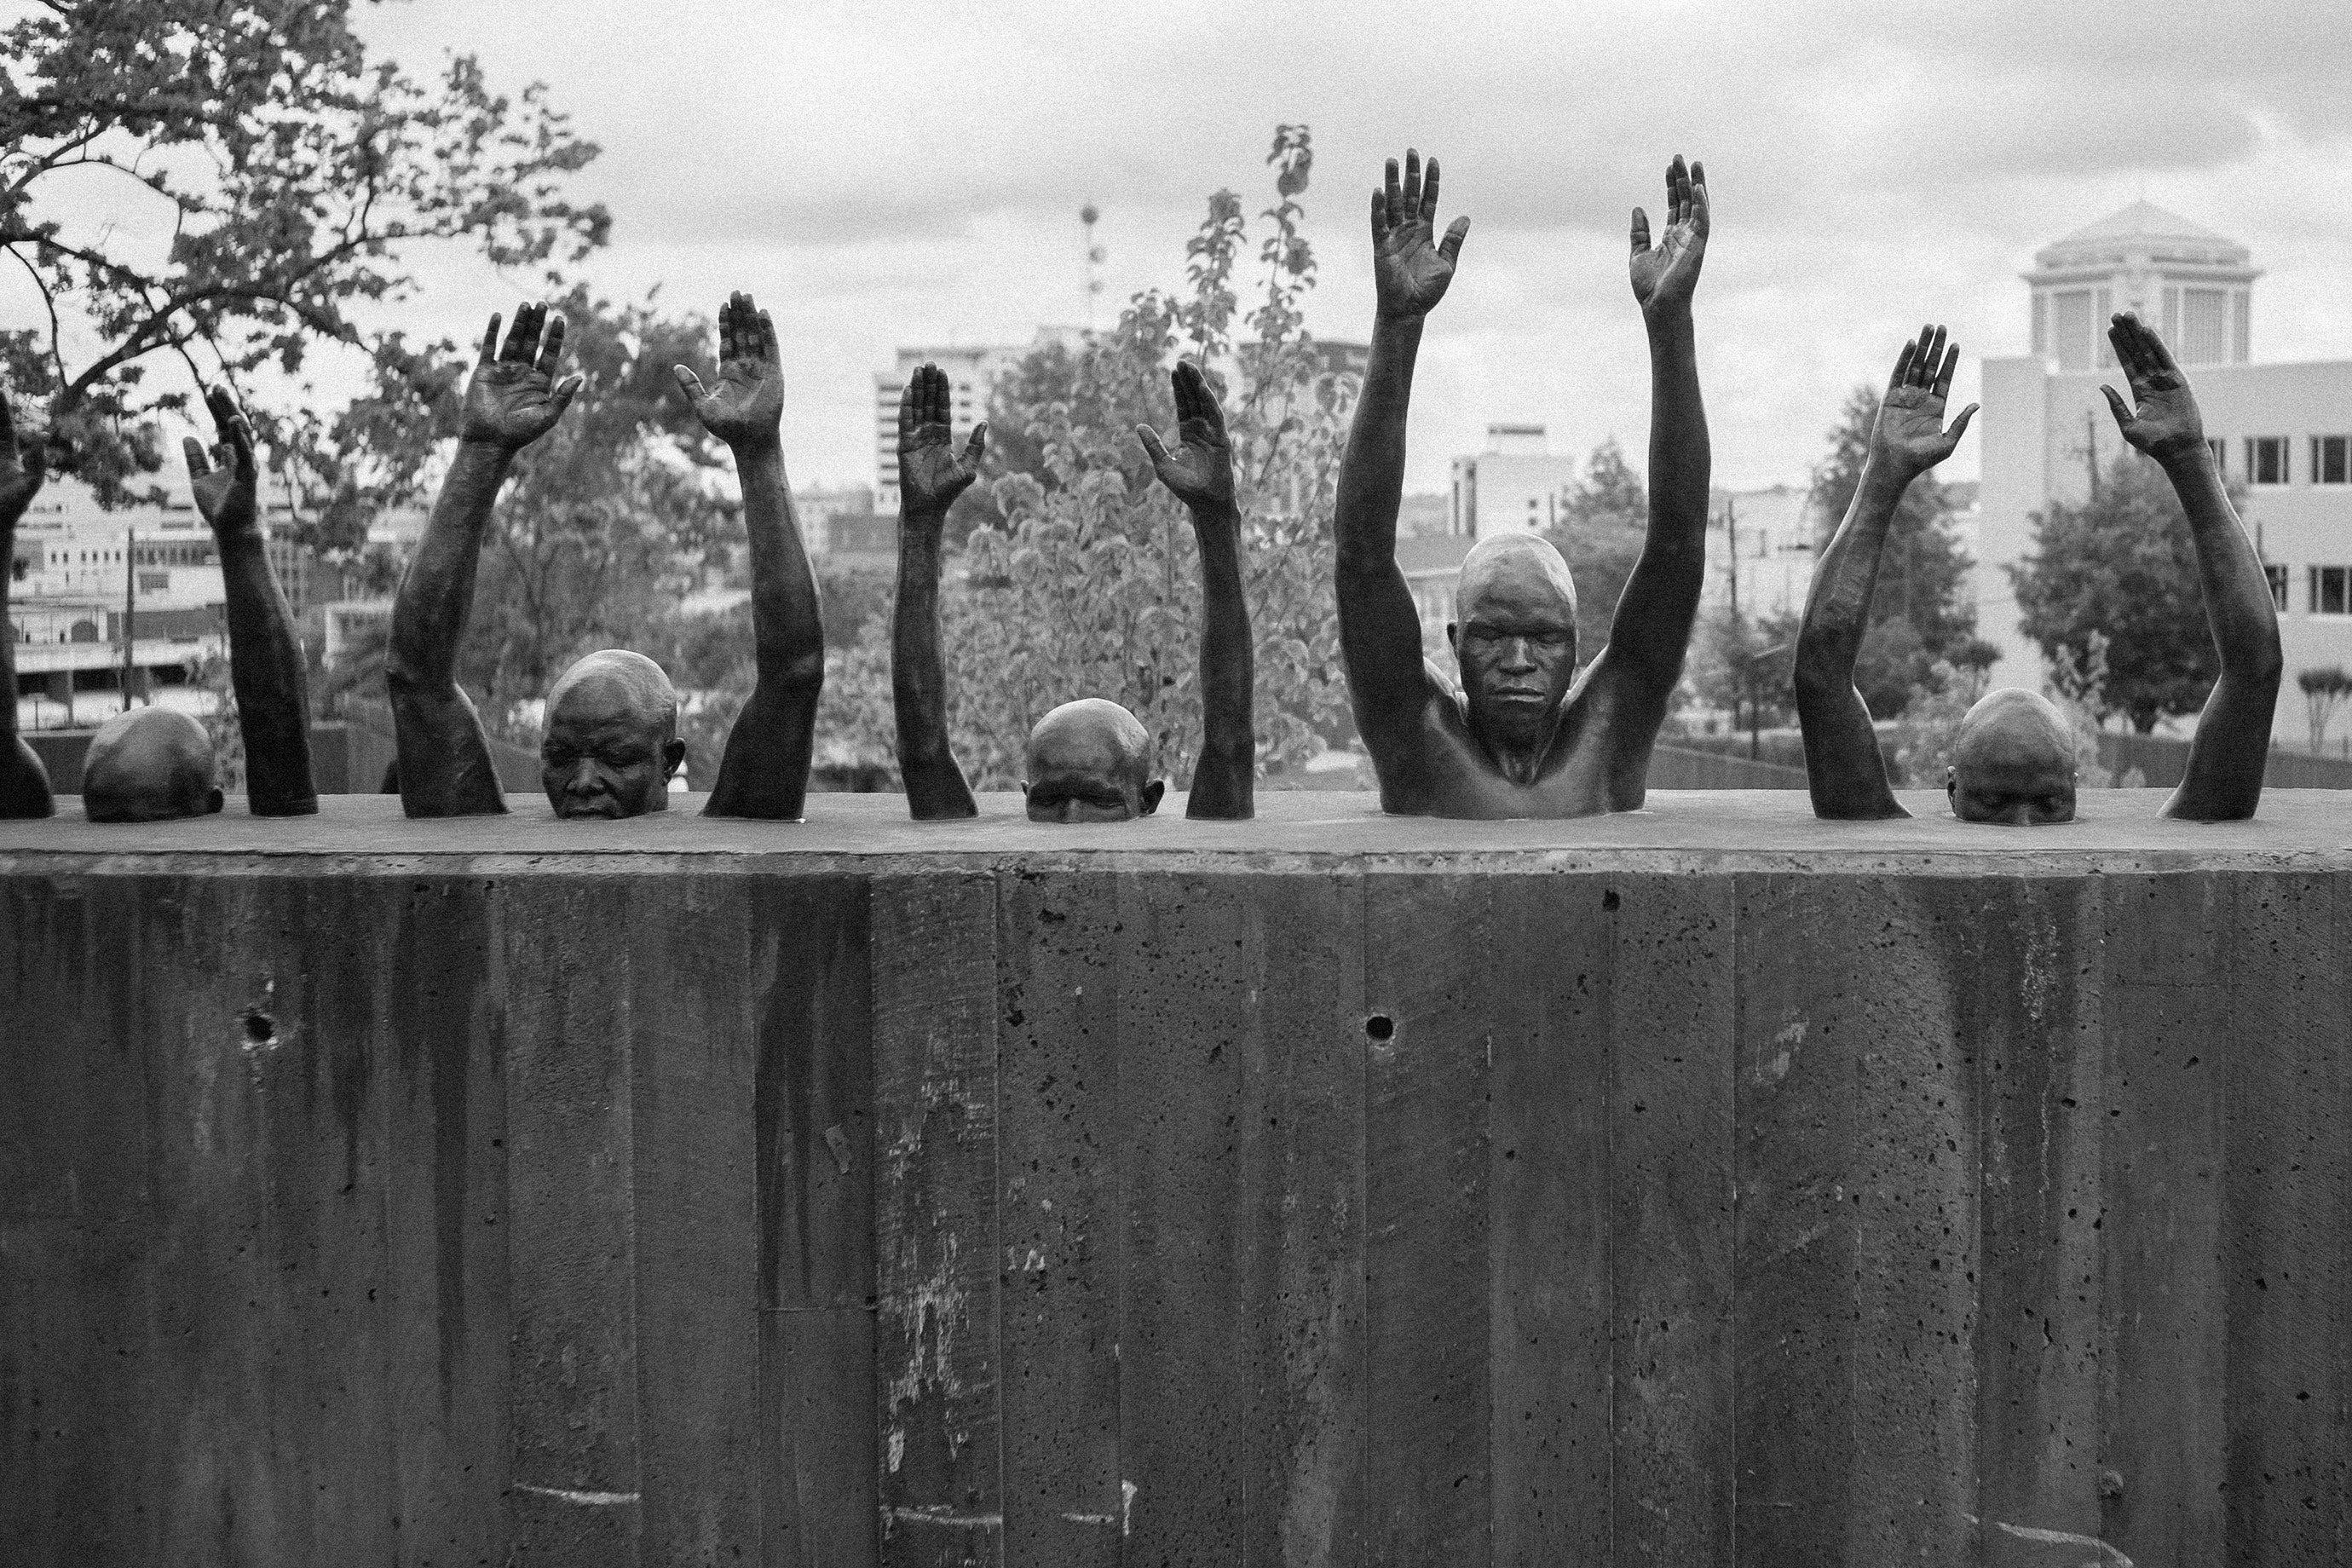 A sculpture, titled “Raise Up,” that is meant to echo the “hands up, don’t shoot” motion of Black Lives Matter protests.